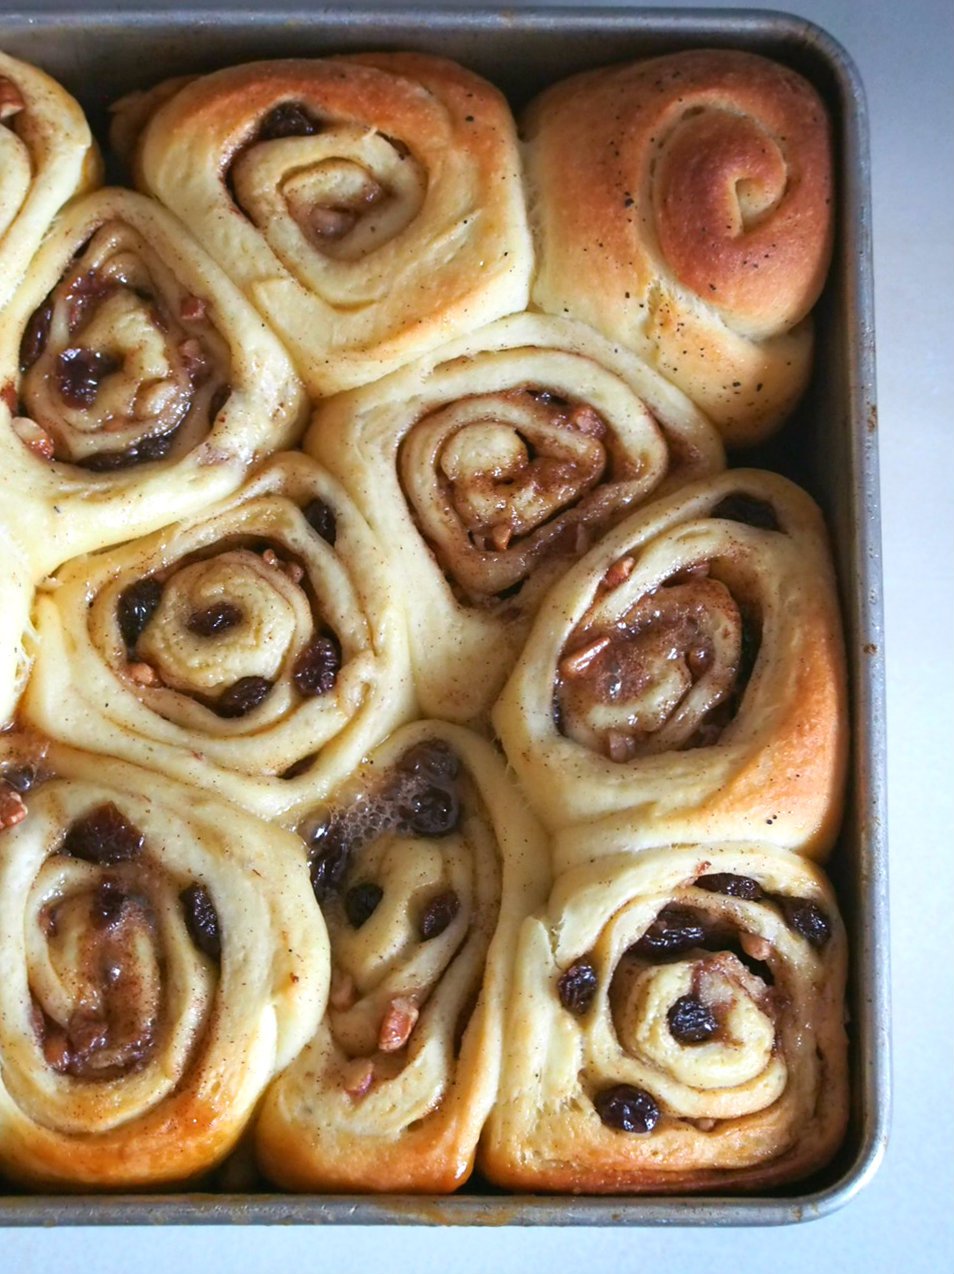 These sticky buns are loaded with pecan nuts and raisins, and covered in a sweet and sticky brown sugar topping. These are the ultimate cinnamon rolls using brioche dough that is packed with  flavorful cinnamon sugar filling.